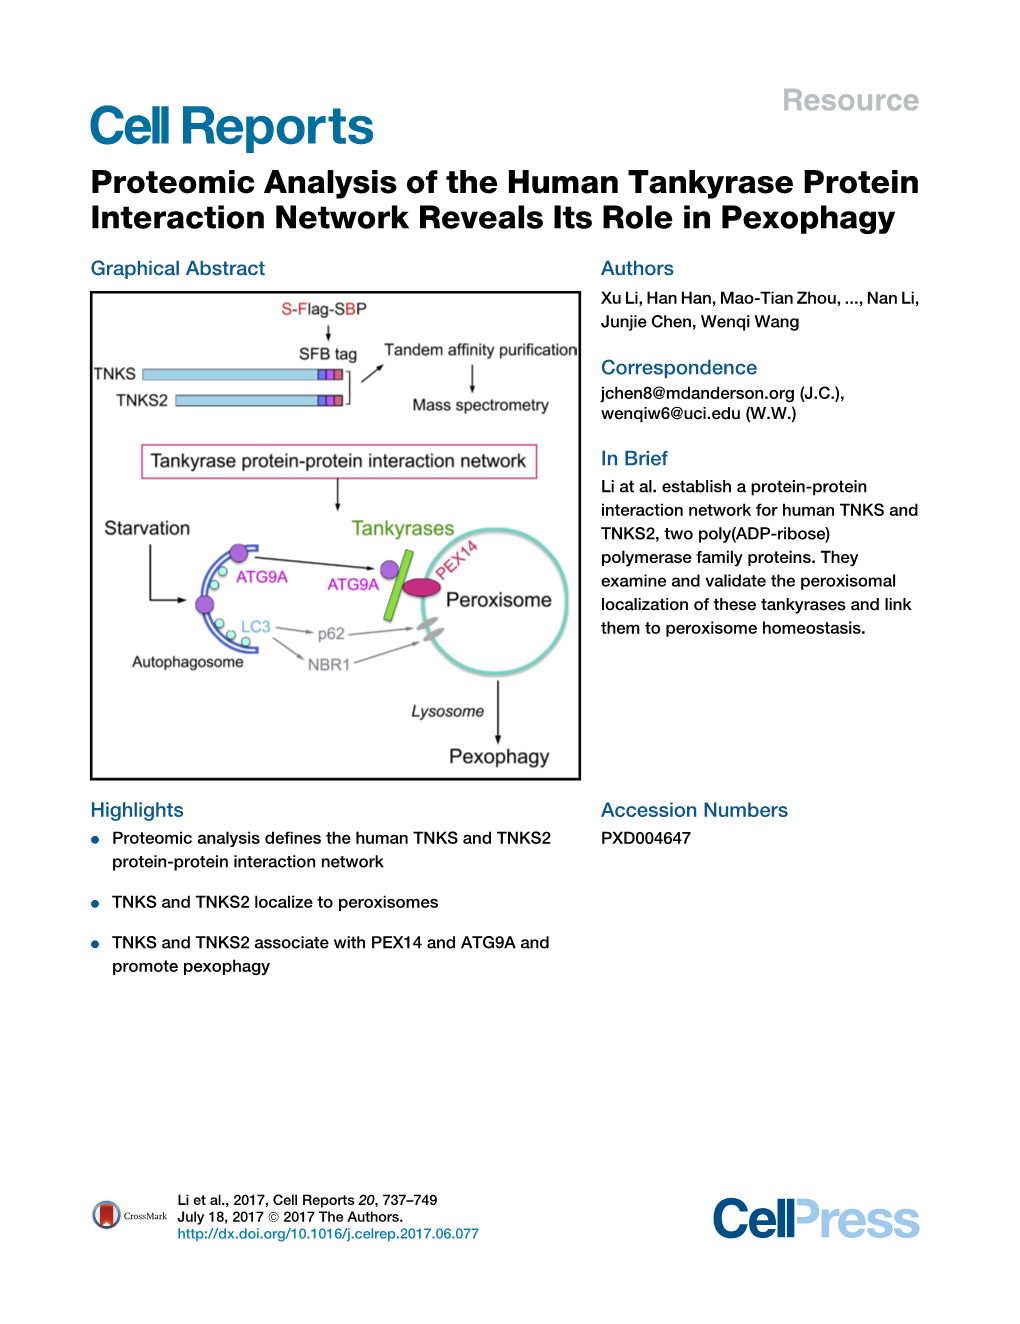 Proteomic Analysis of the Human Tankyrase Protein Interaction Network Reveals Its Role in Pexophagy